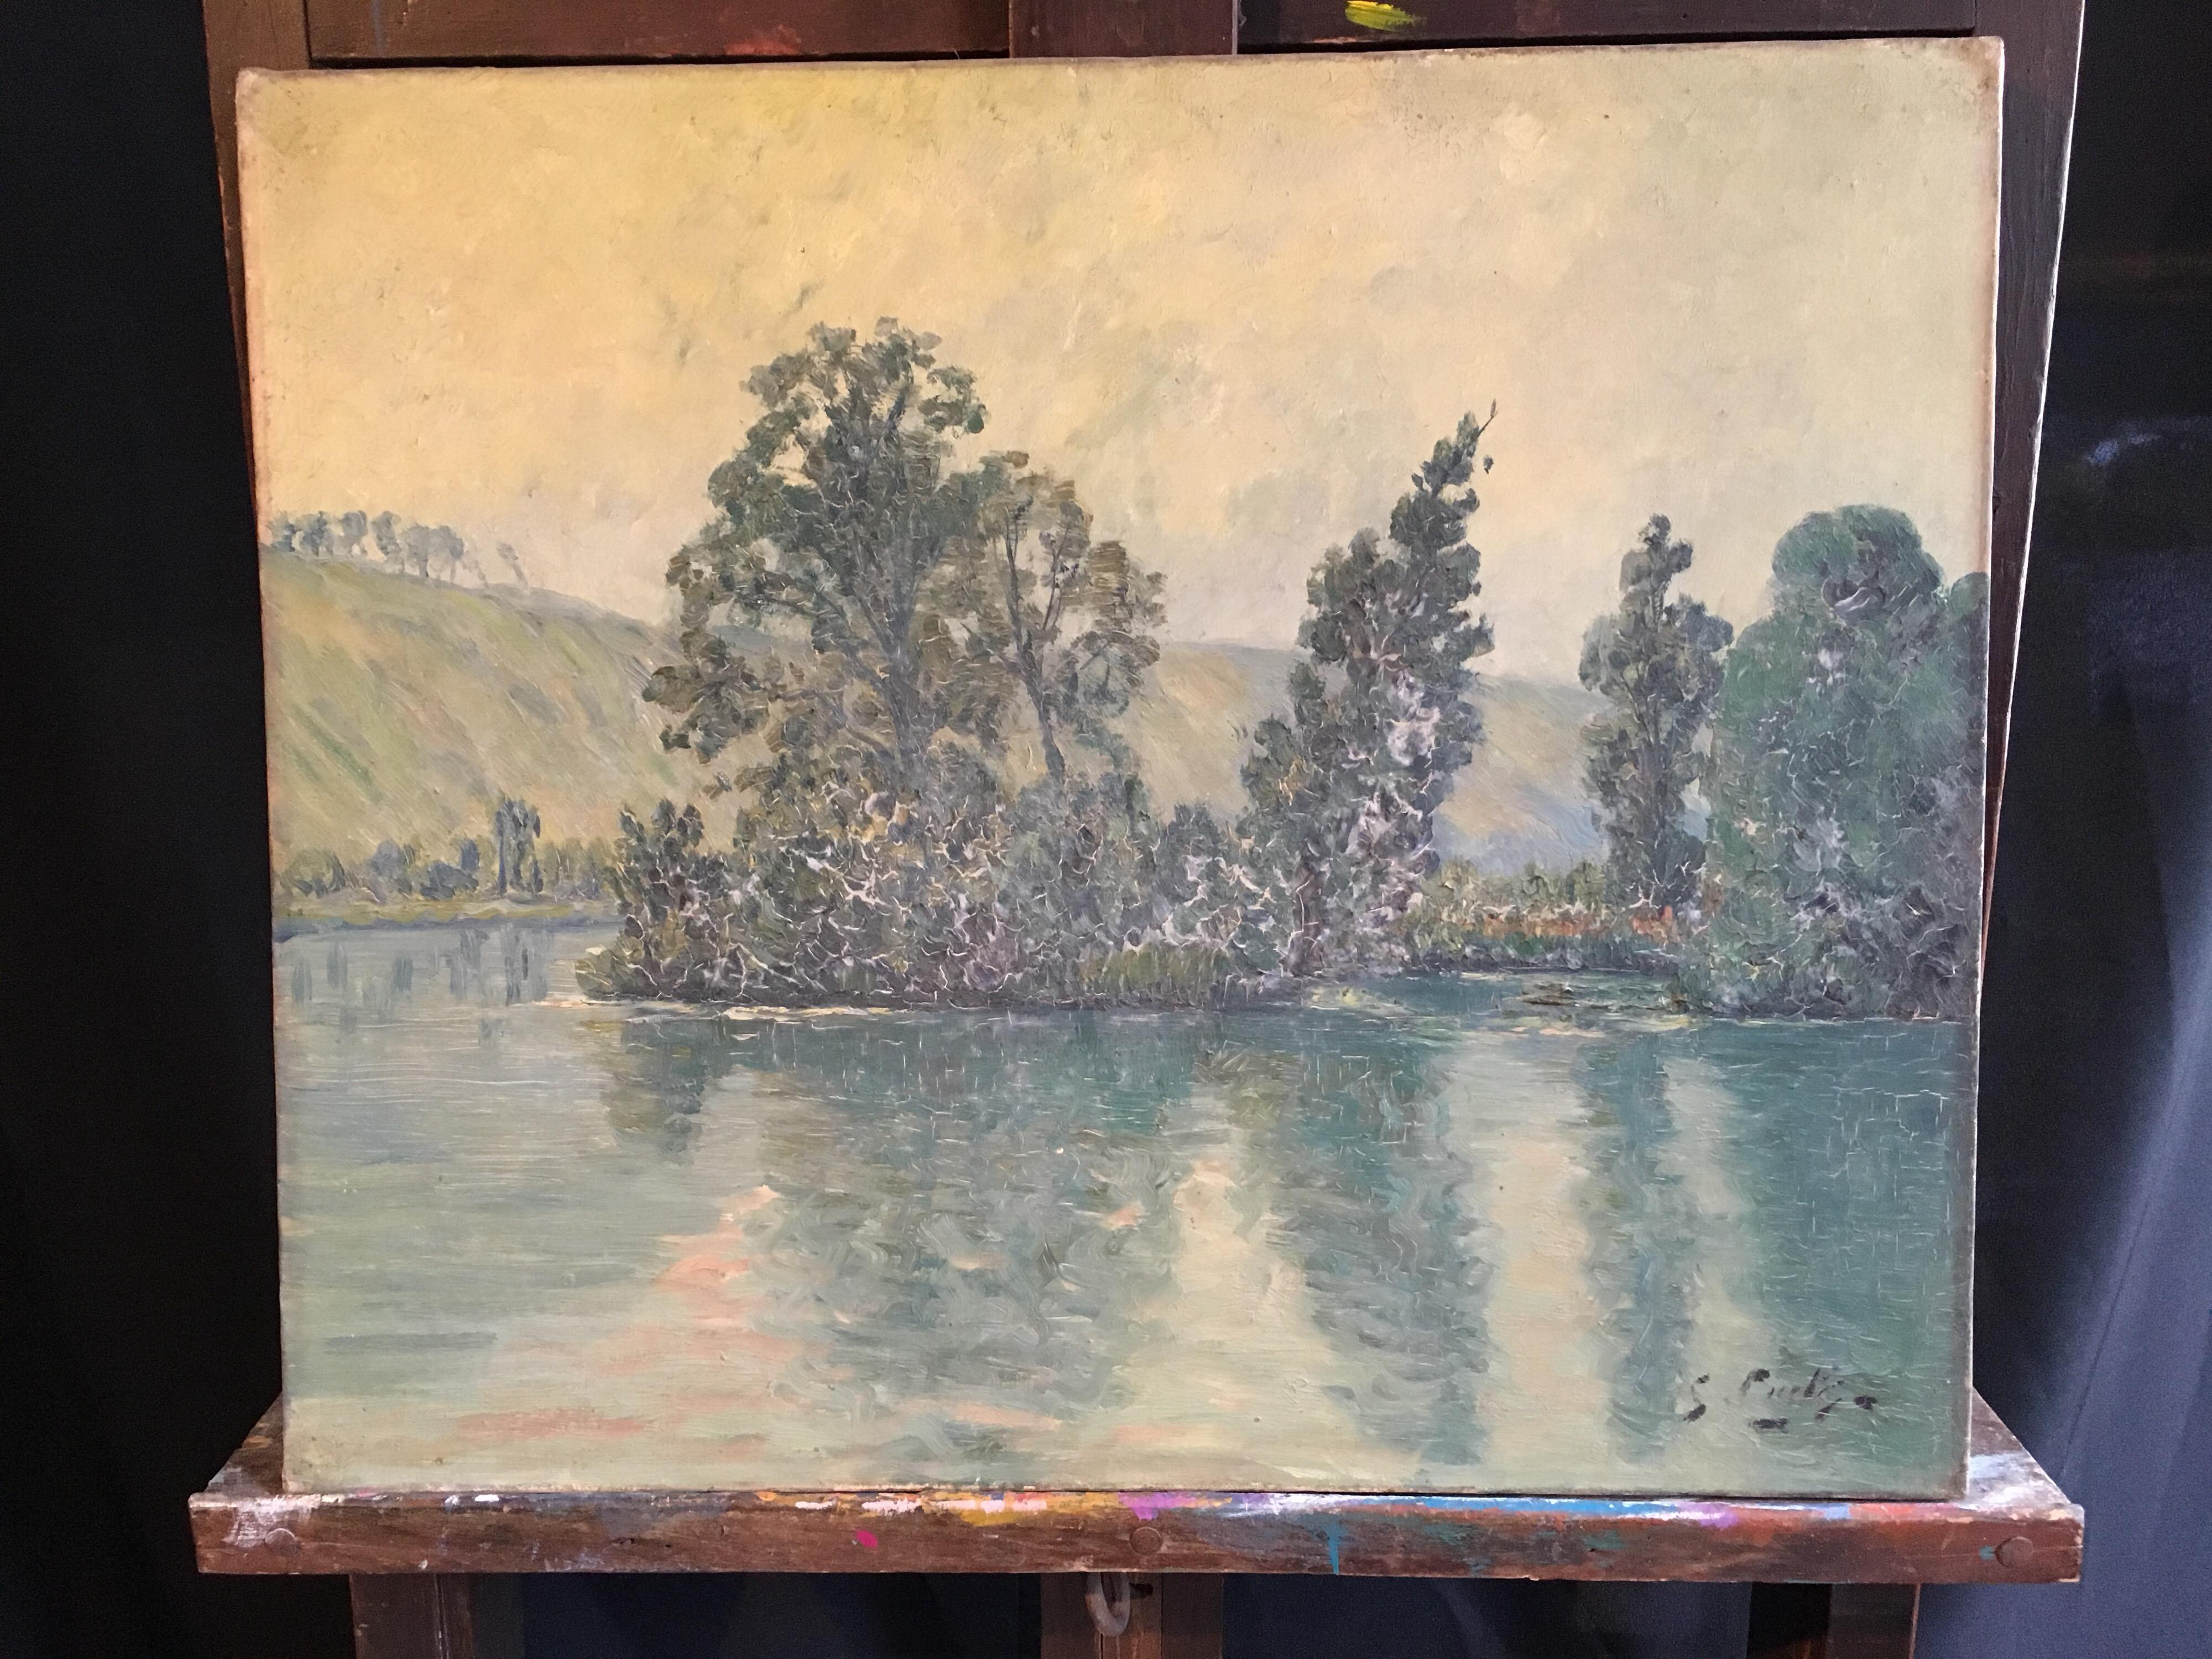 View of the Lake, French Impressionist Landscape, Oil Painting, Signed
French School, early 20th Century
Indistinctly signed on the lower right hand corner
Oil painting on canvas, unframed
Canvas size: 18 x 21.5 inches

Hauntingly beautiful